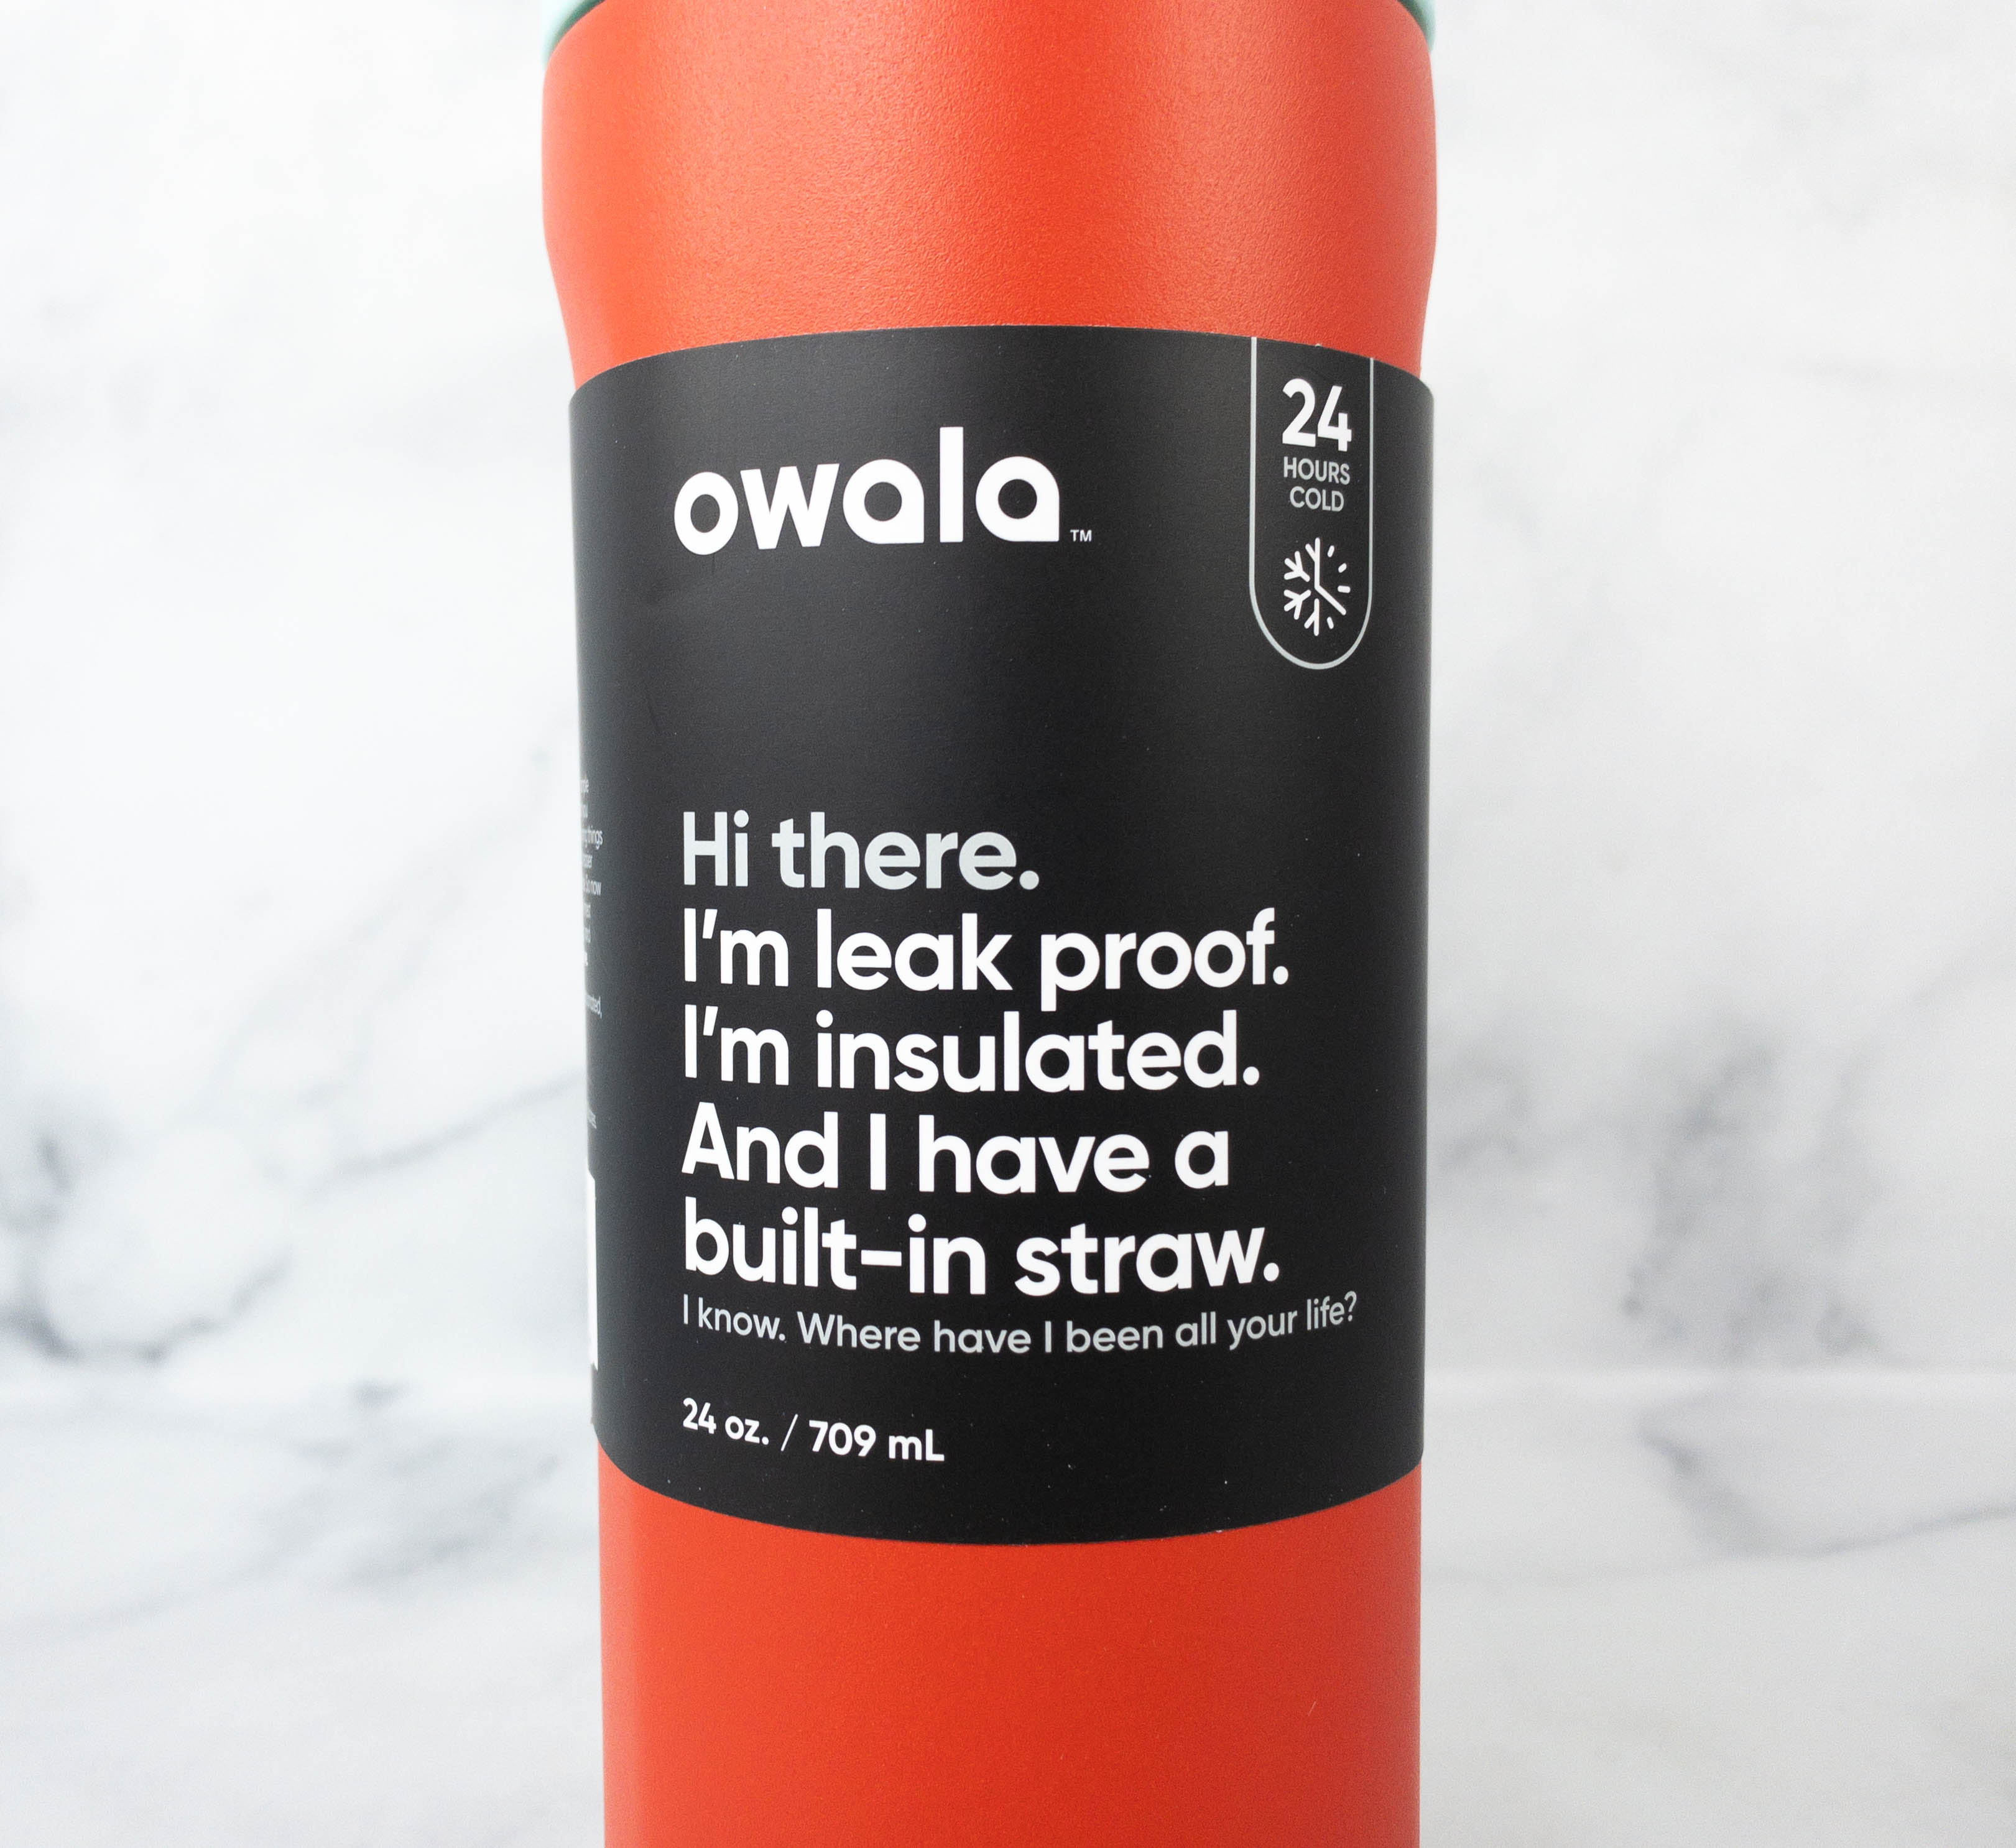 https://hellosubscription.com/wp-content/uploads/2021/05/owala-tumbler-review-3.jpg?quality=90&strip=all